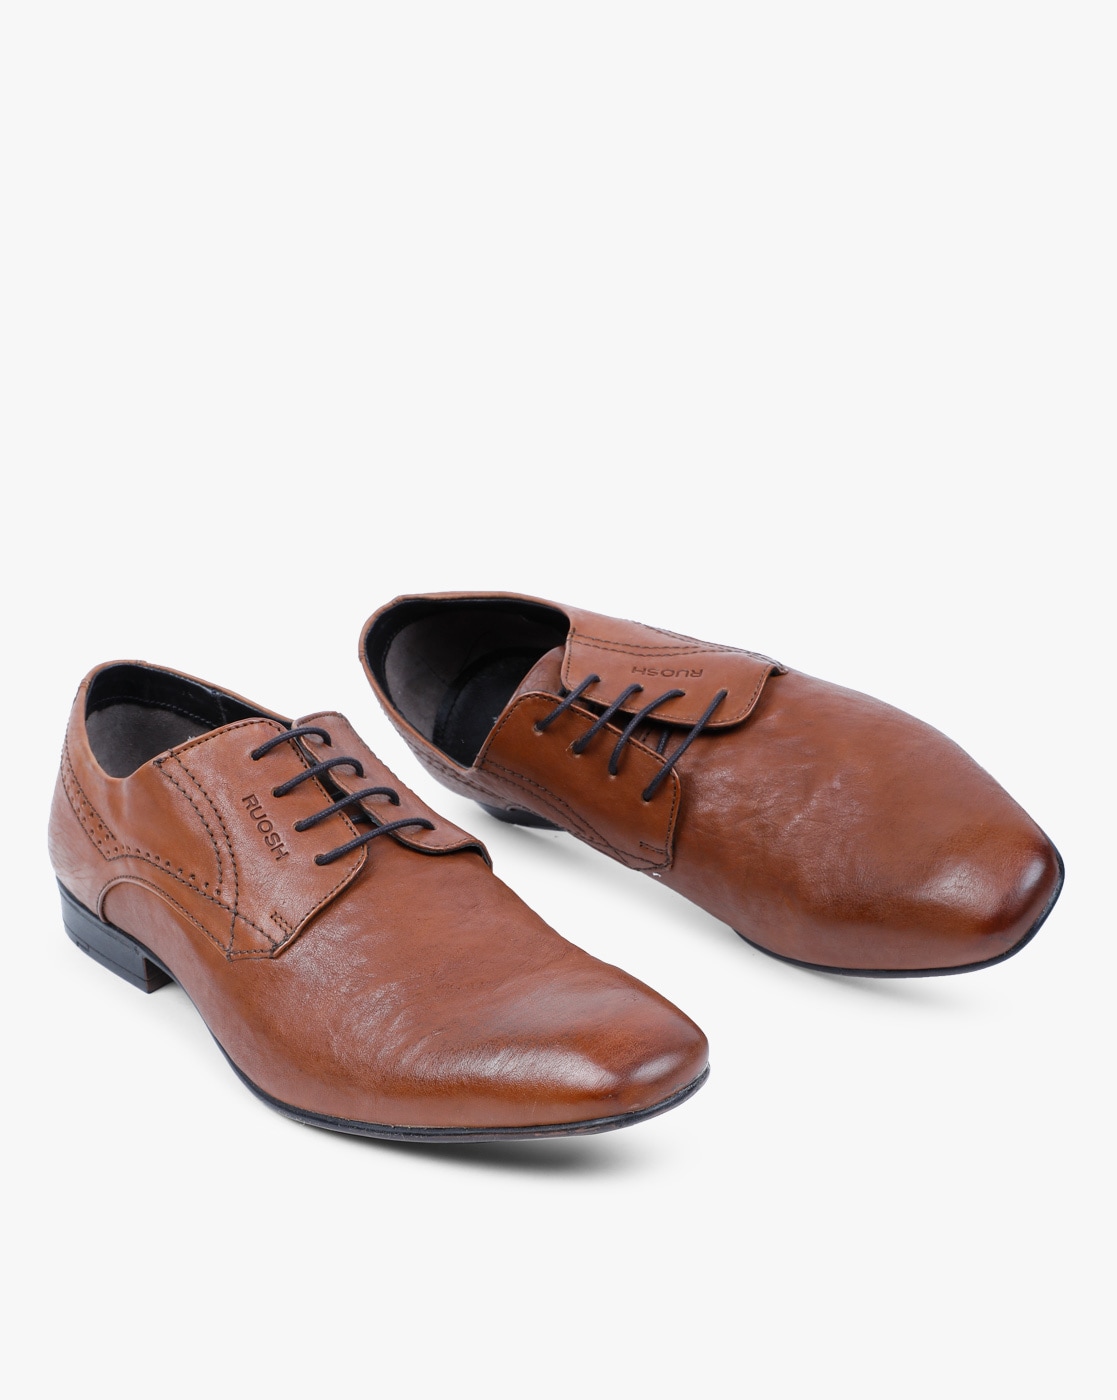 Buy ACTION Formal Shoes online - Men - 114 products | FASHIOLA.in